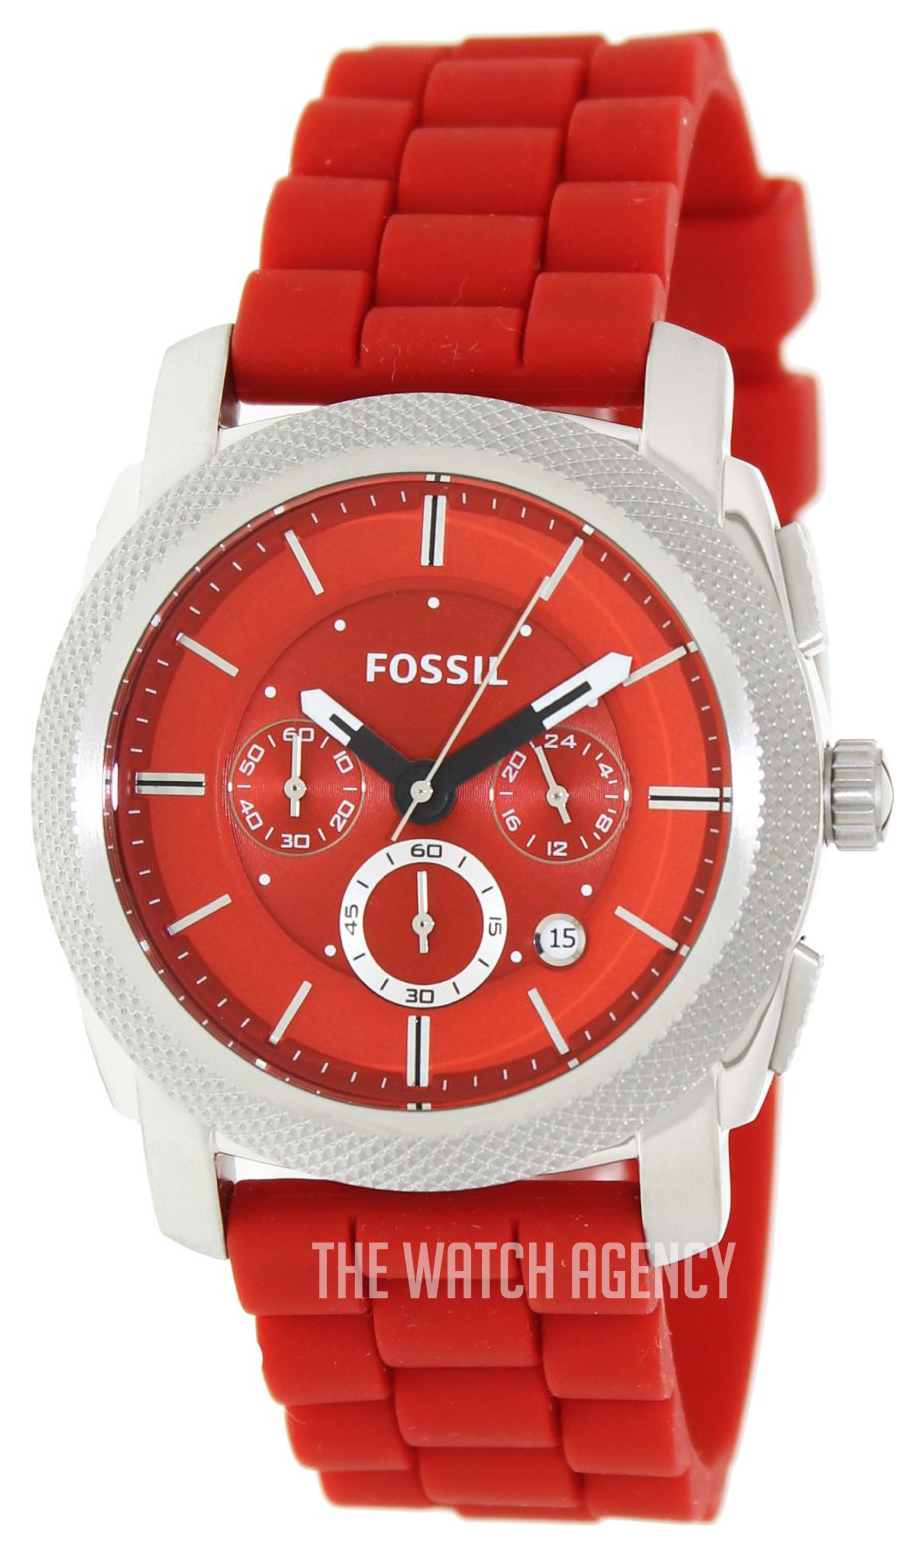 【76%OFF!】 Fossil Chronograph Red Watch-FS4808 ecousarecycling.com